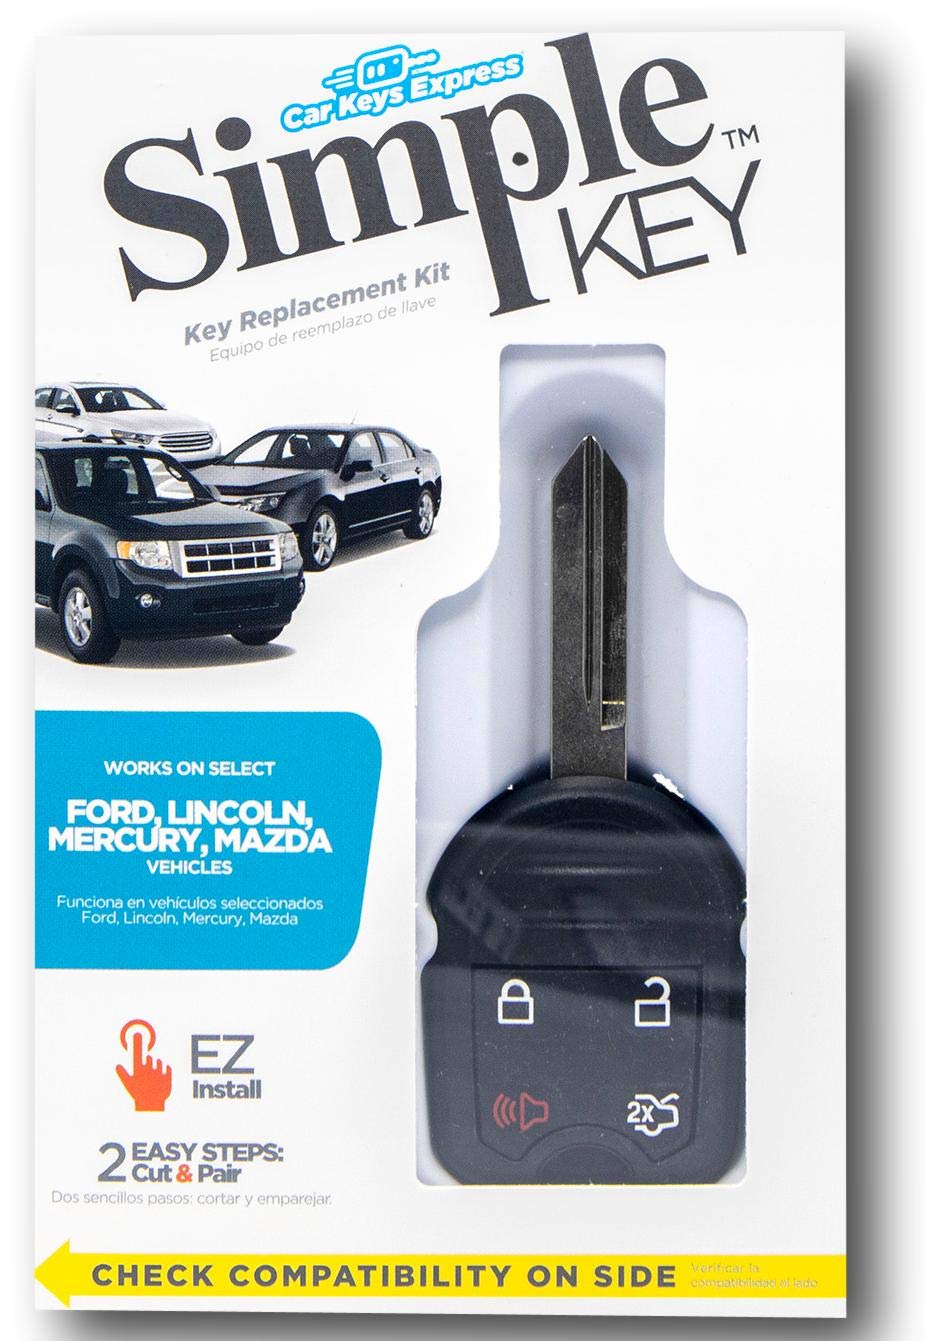 Simple Key Programmer Bundle with Key(s) & Cable - Designed for Ford, Lincoln, Mercury, Mazda Vehicles: Program Key Yourself (2 Keys, 4 Button Key: Trunk Release, Lock, Unlock, Panic)